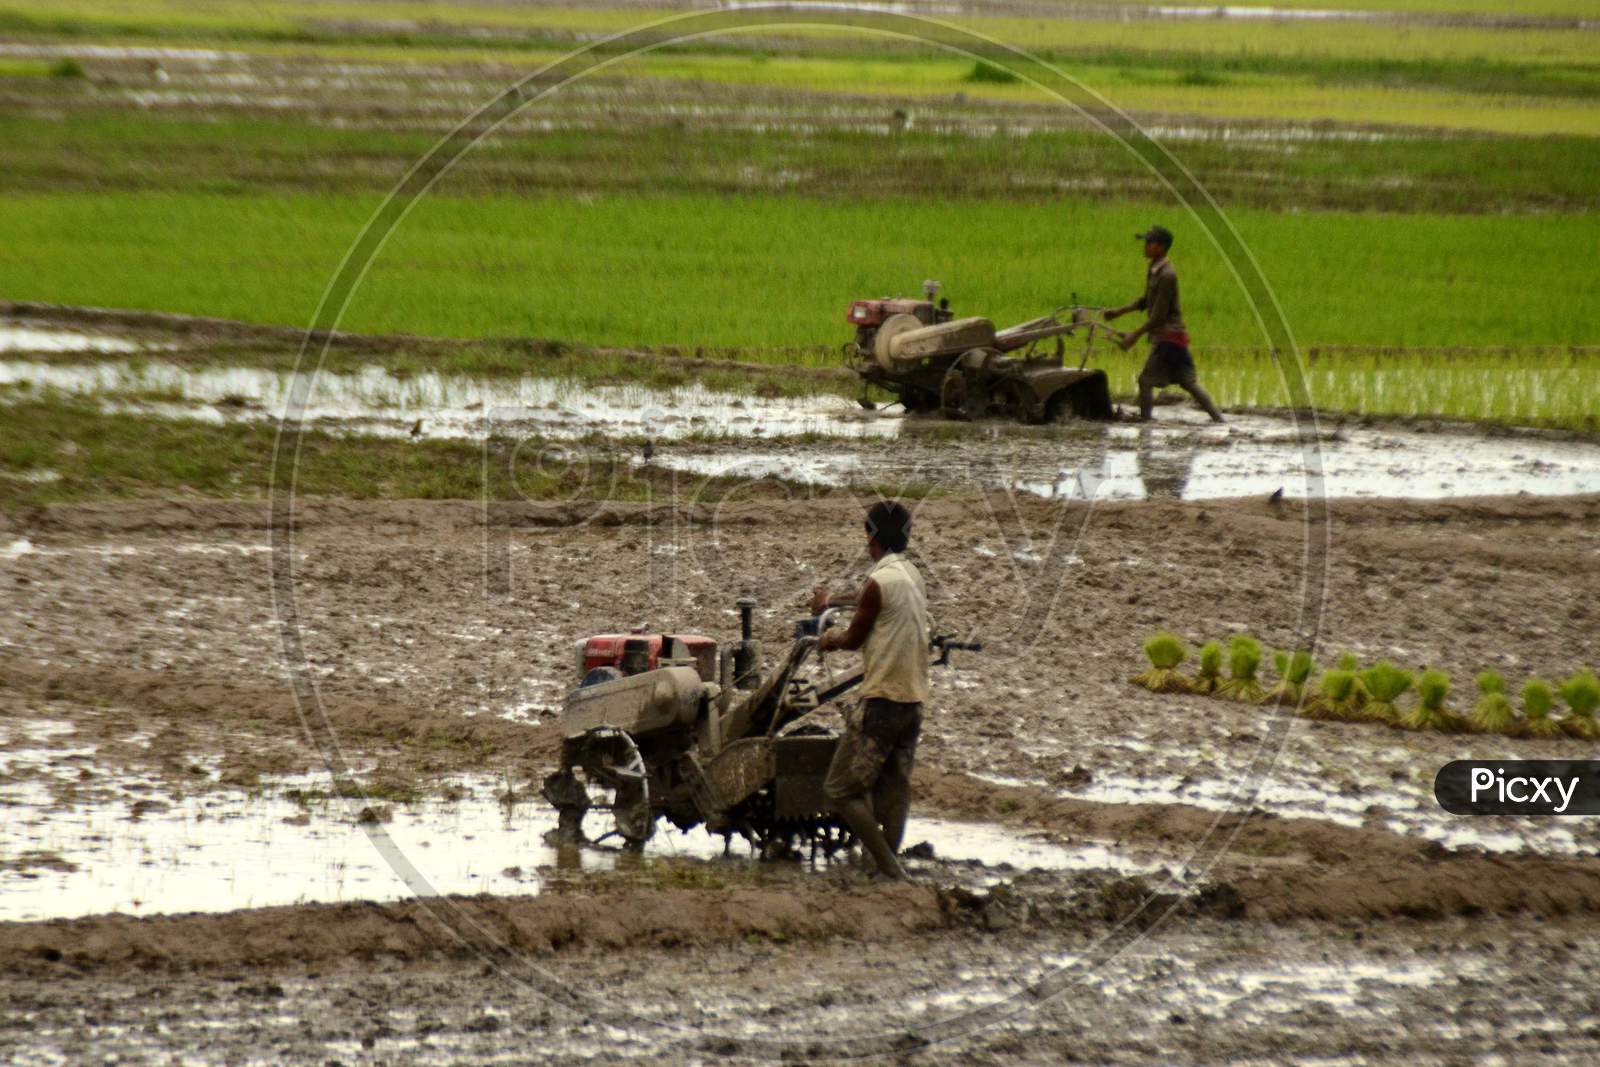 A Farmer Ploughing With Modern Agricultural  Equipment In an Paddy Field